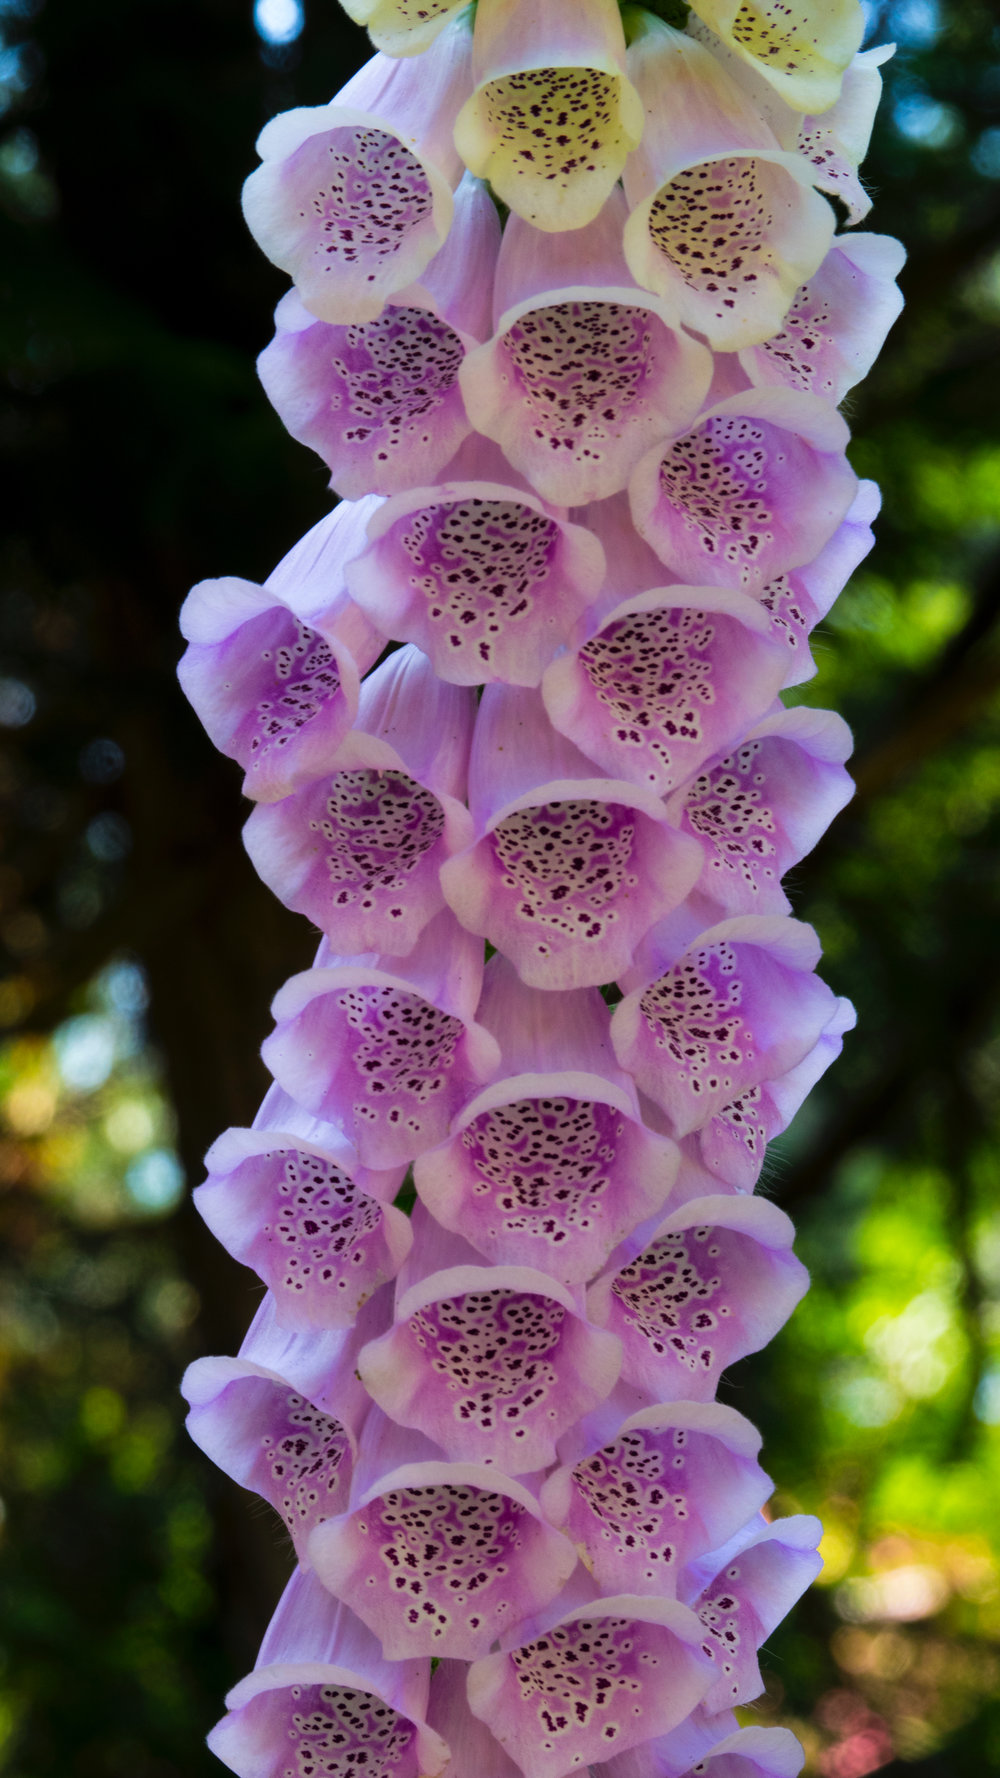  The foxgloves were in full bloom while we were there. 